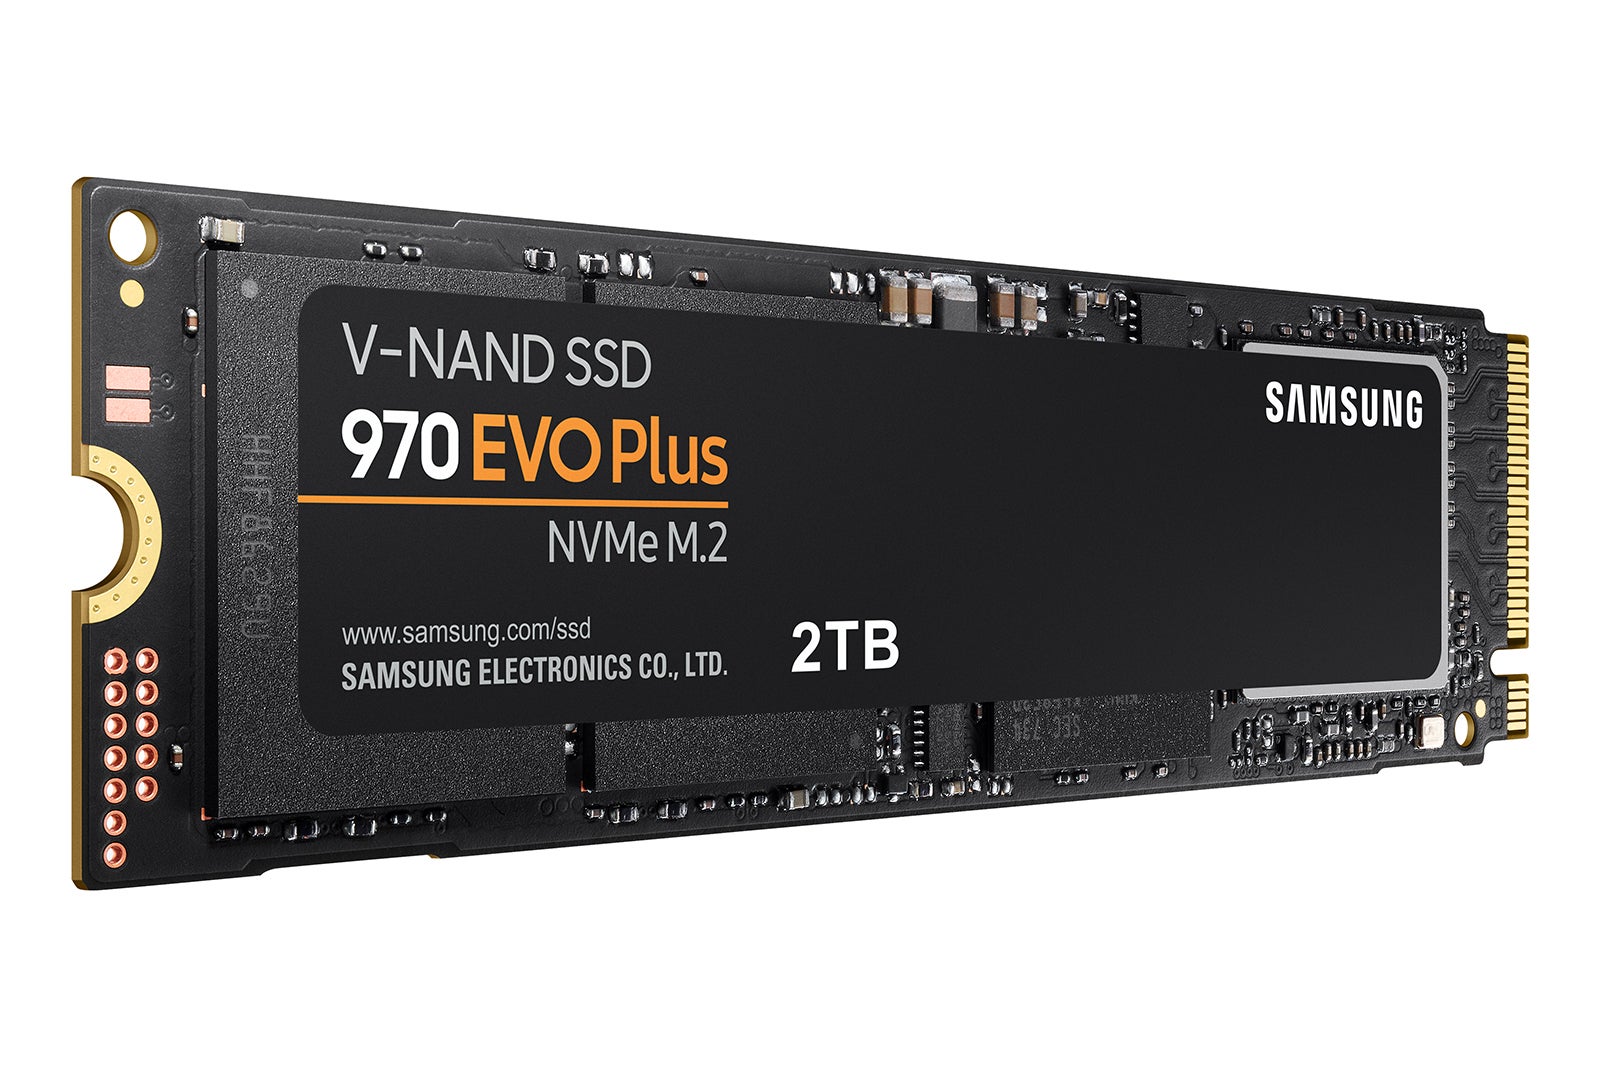 Salvage the mountainous, fast 2TB Samsung 970 Evo SSD for its lowest fee yet